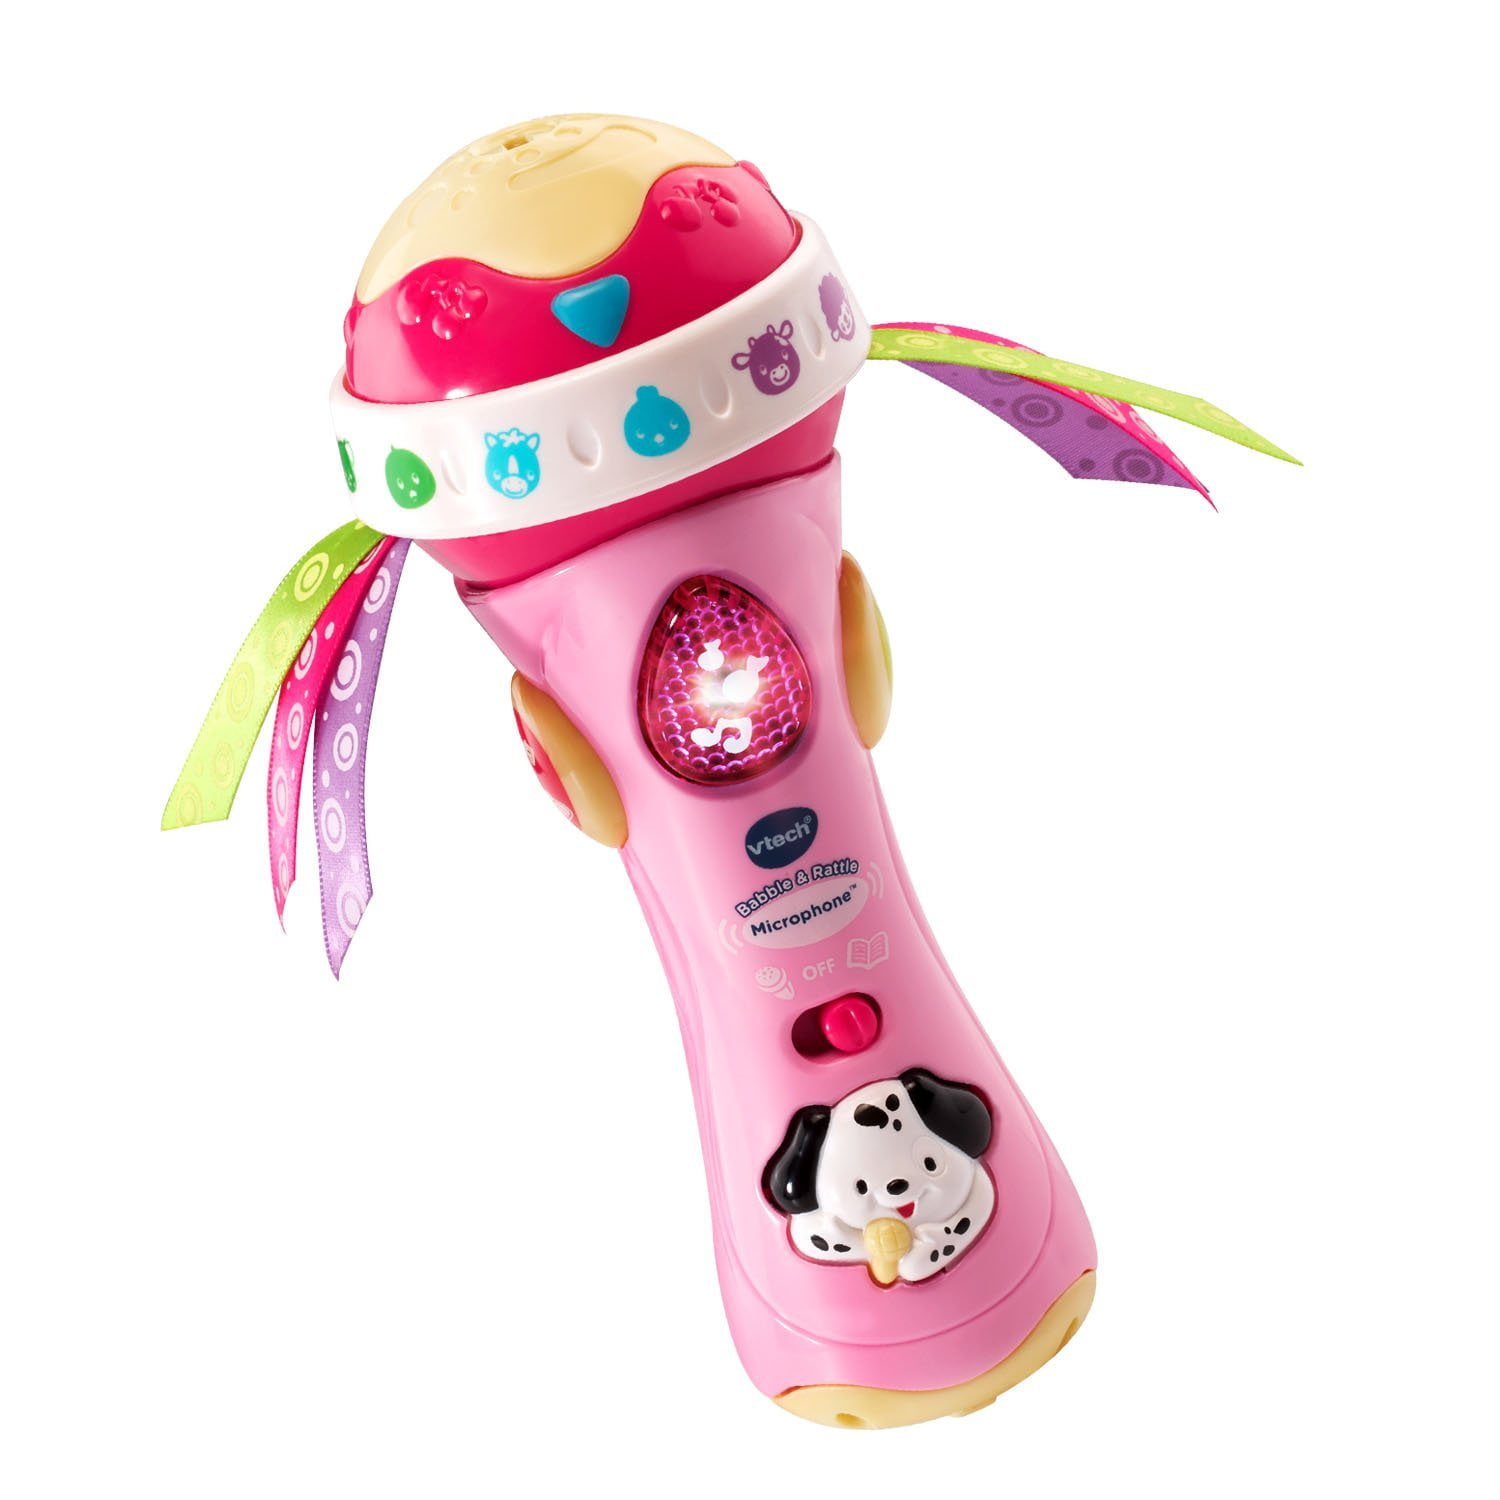 rattle toys online